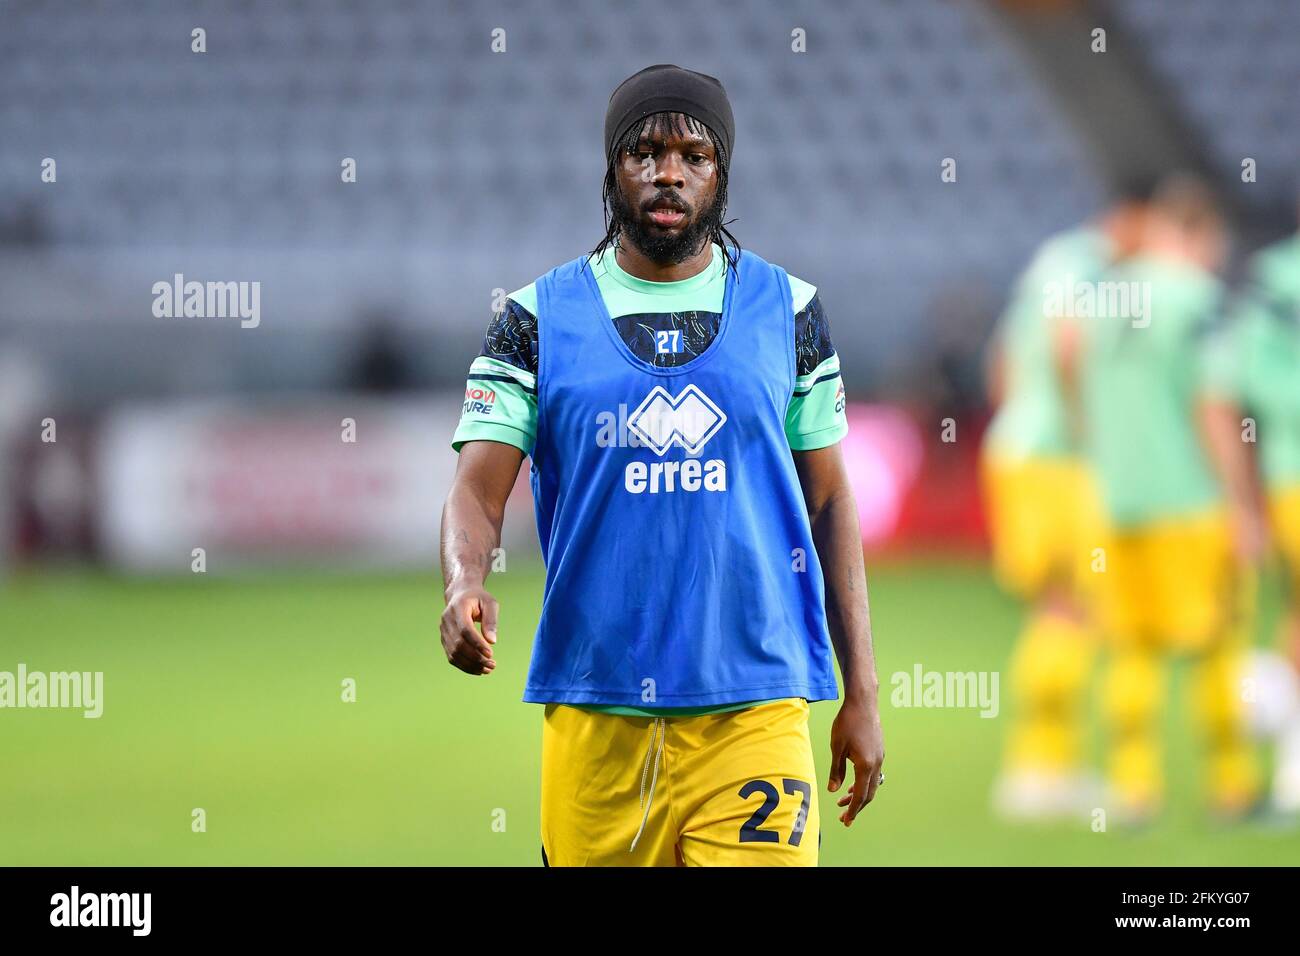 Turin, Italy. 3rd, May 2021. Gervinho (27) of Parma Calcio seen during warm up before the Serie A match between Torino FC and Parma Calcio at Stadio Grande Torino in Turin, Italy. (Photo credit: Gonzales Photo - Tommaso Fimiano). Stock Photo